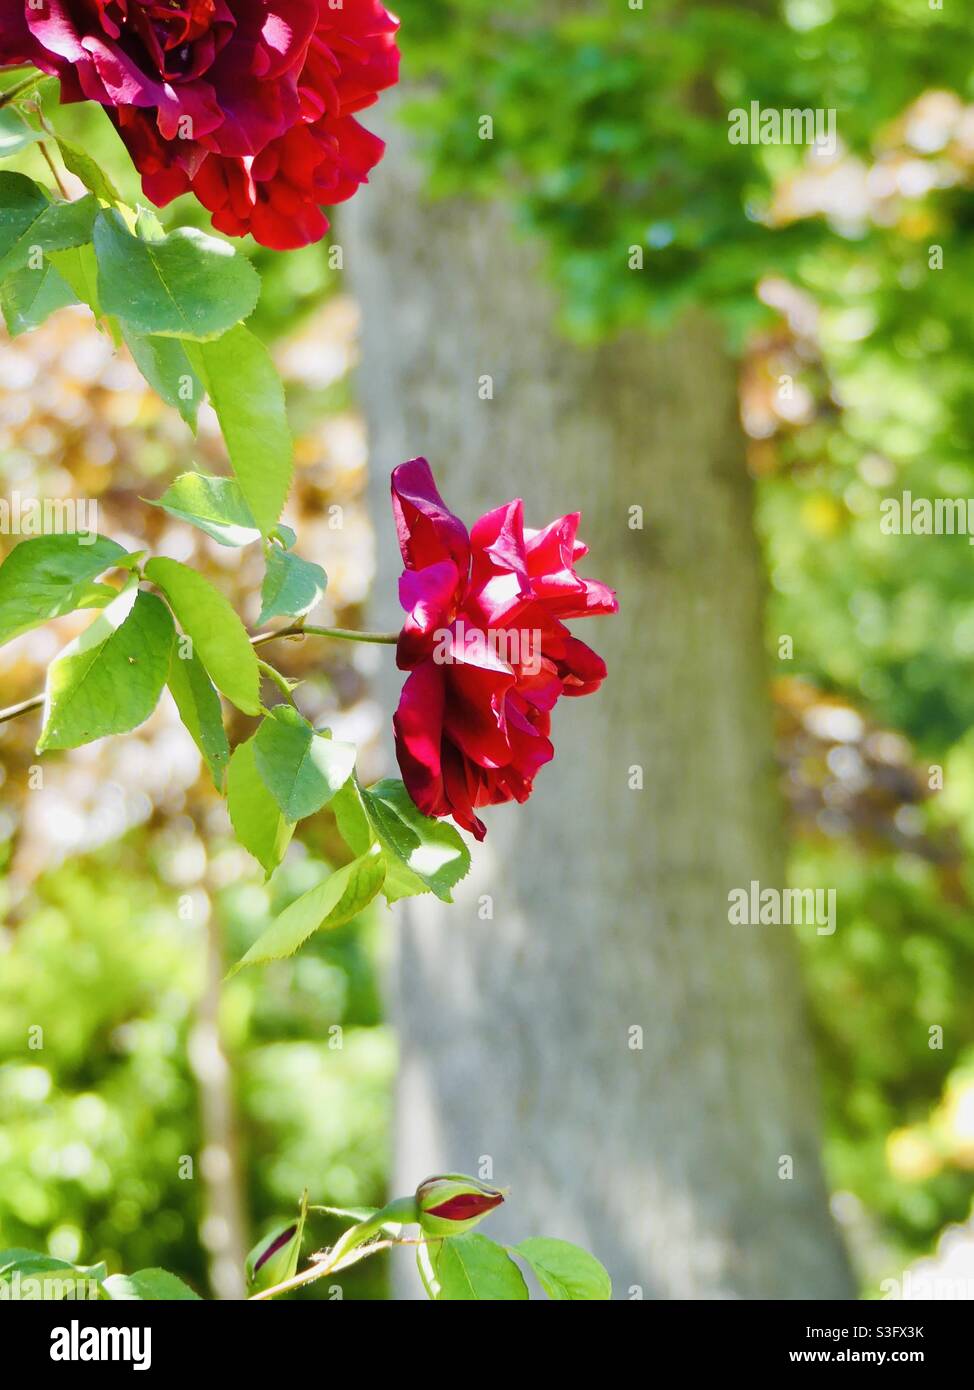 A red rose ? by a tree in Spring ?. Stock Photo